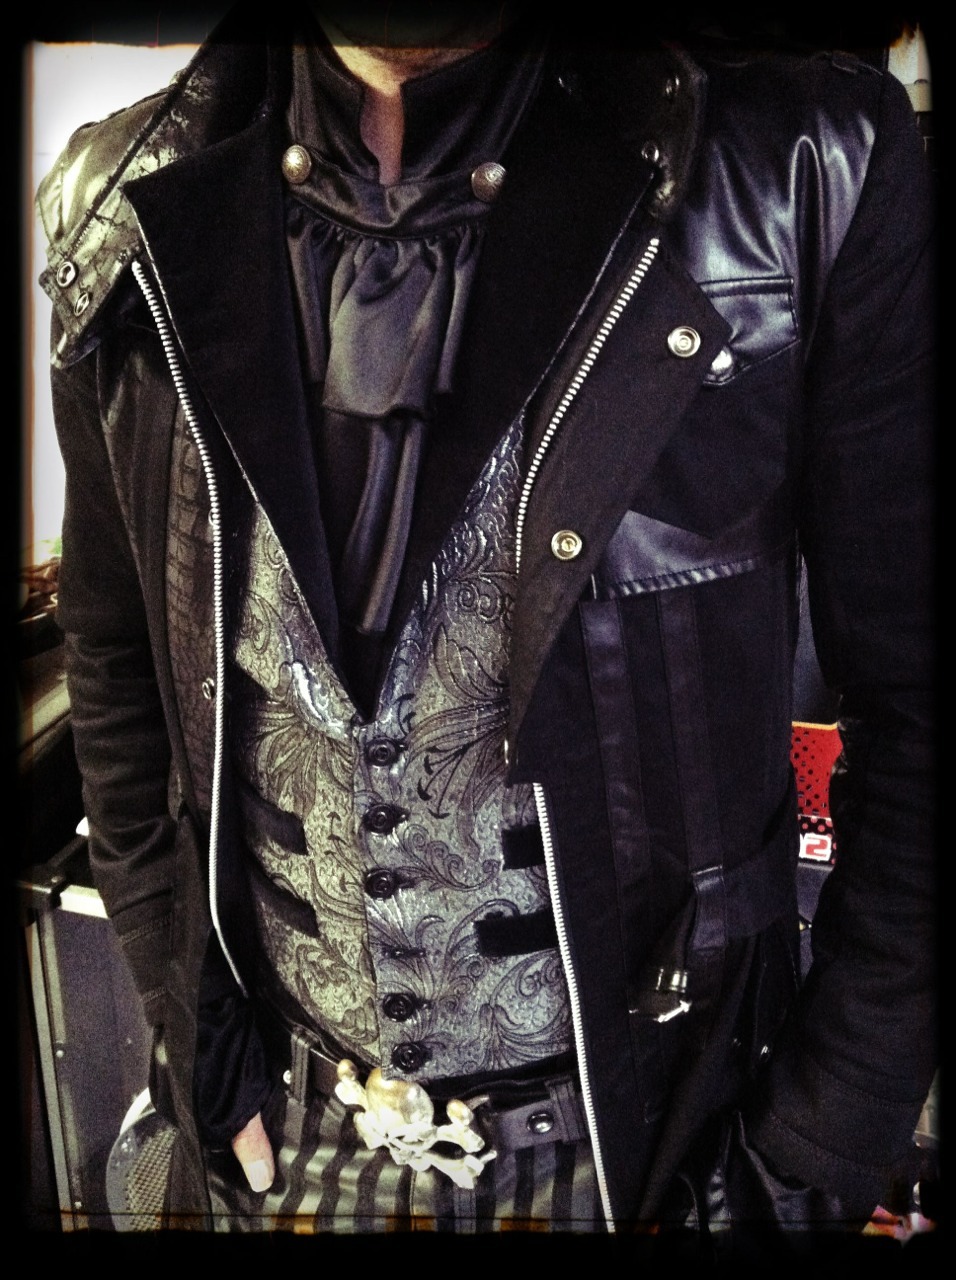 veiledvisage:  Mr. Cyborg is super fond of his new h.NAOTO jacket and custom vest